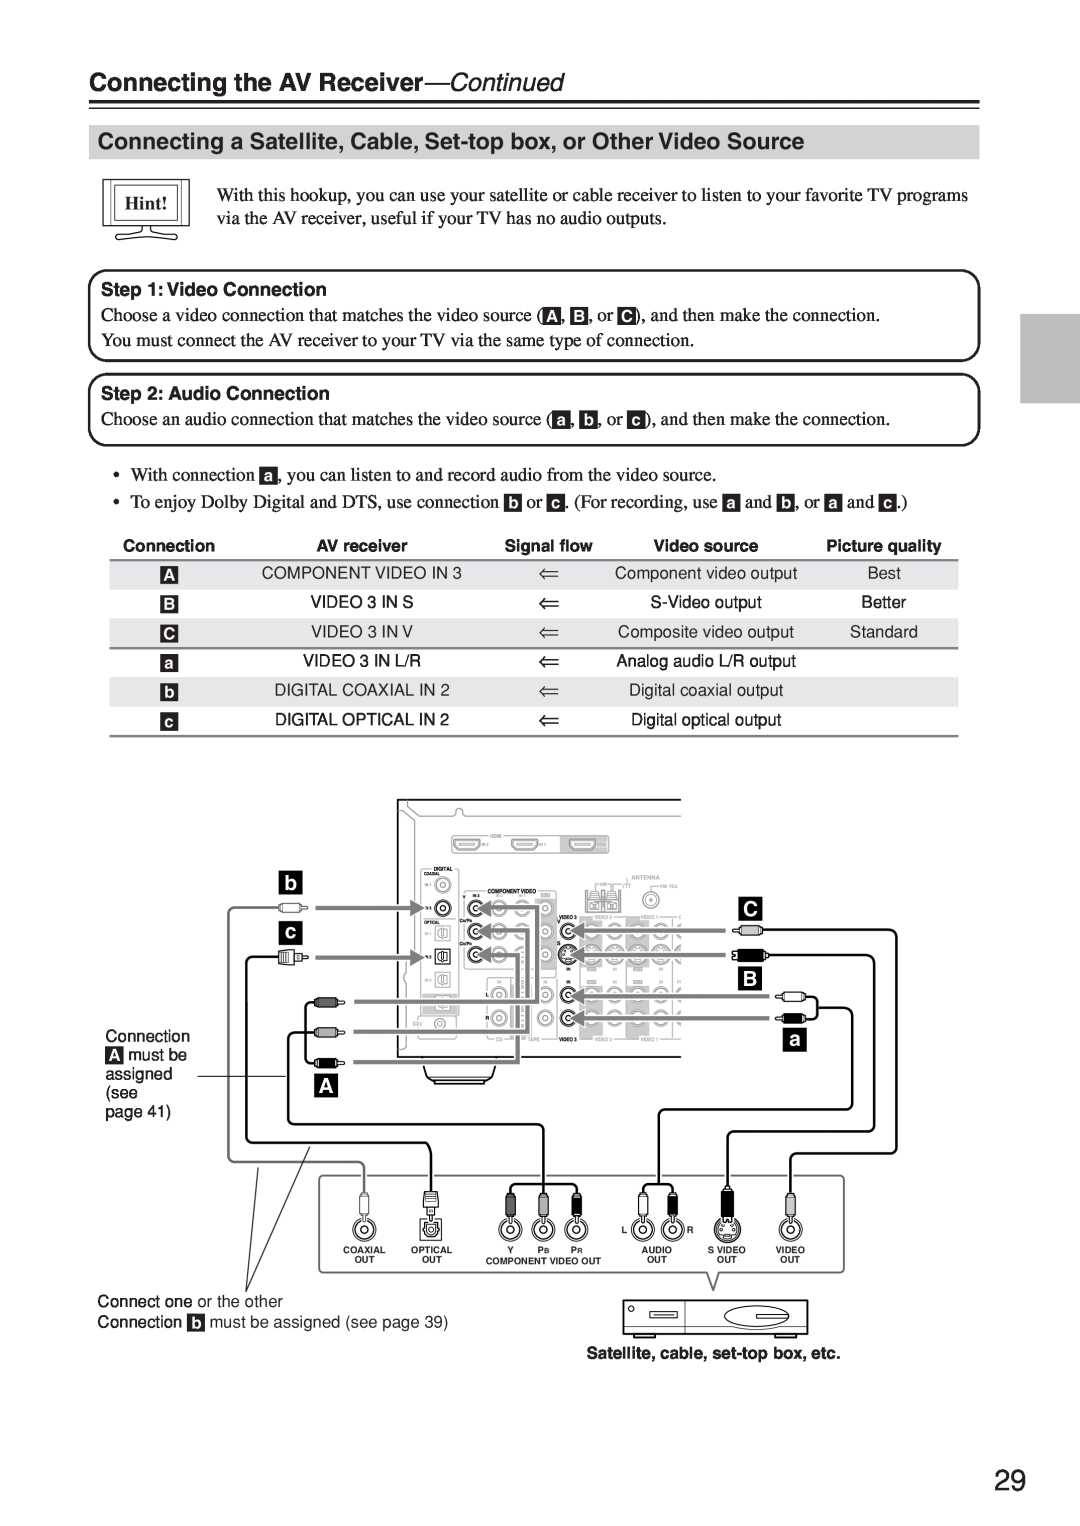 Onkyo HT-R640 instruction manual Connecting a Satellite, Cable, Set-top box, or Other Video Source, C B a, Hint 